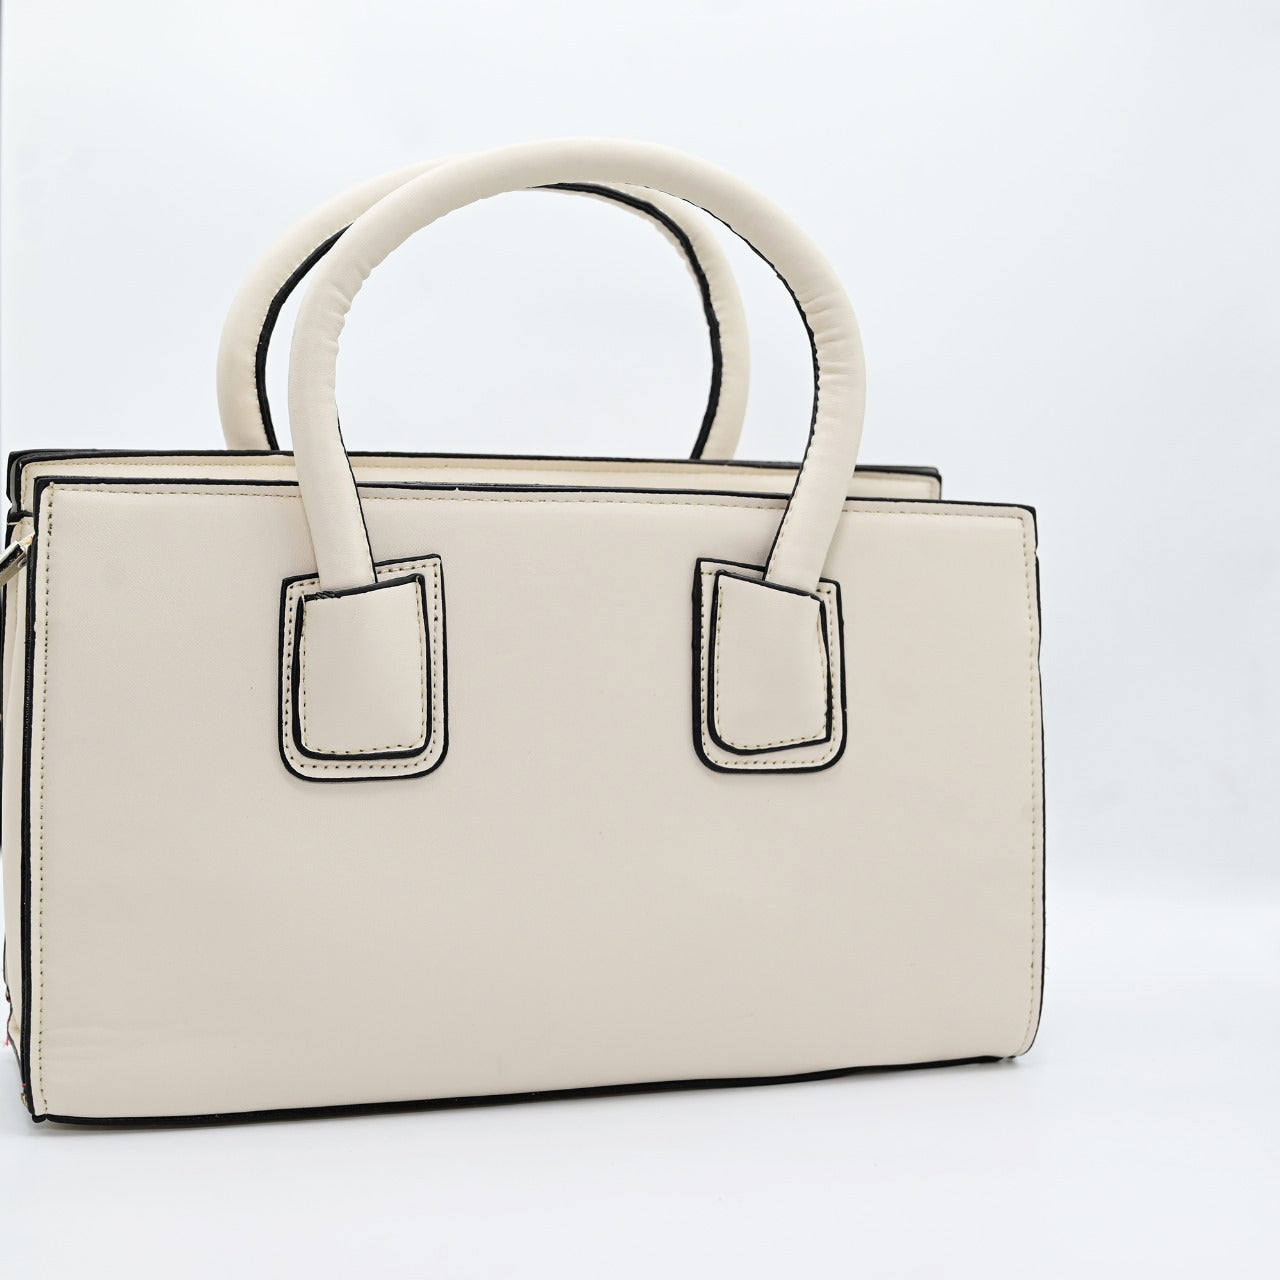 Imported Bag Article in Cream Colours Code 9